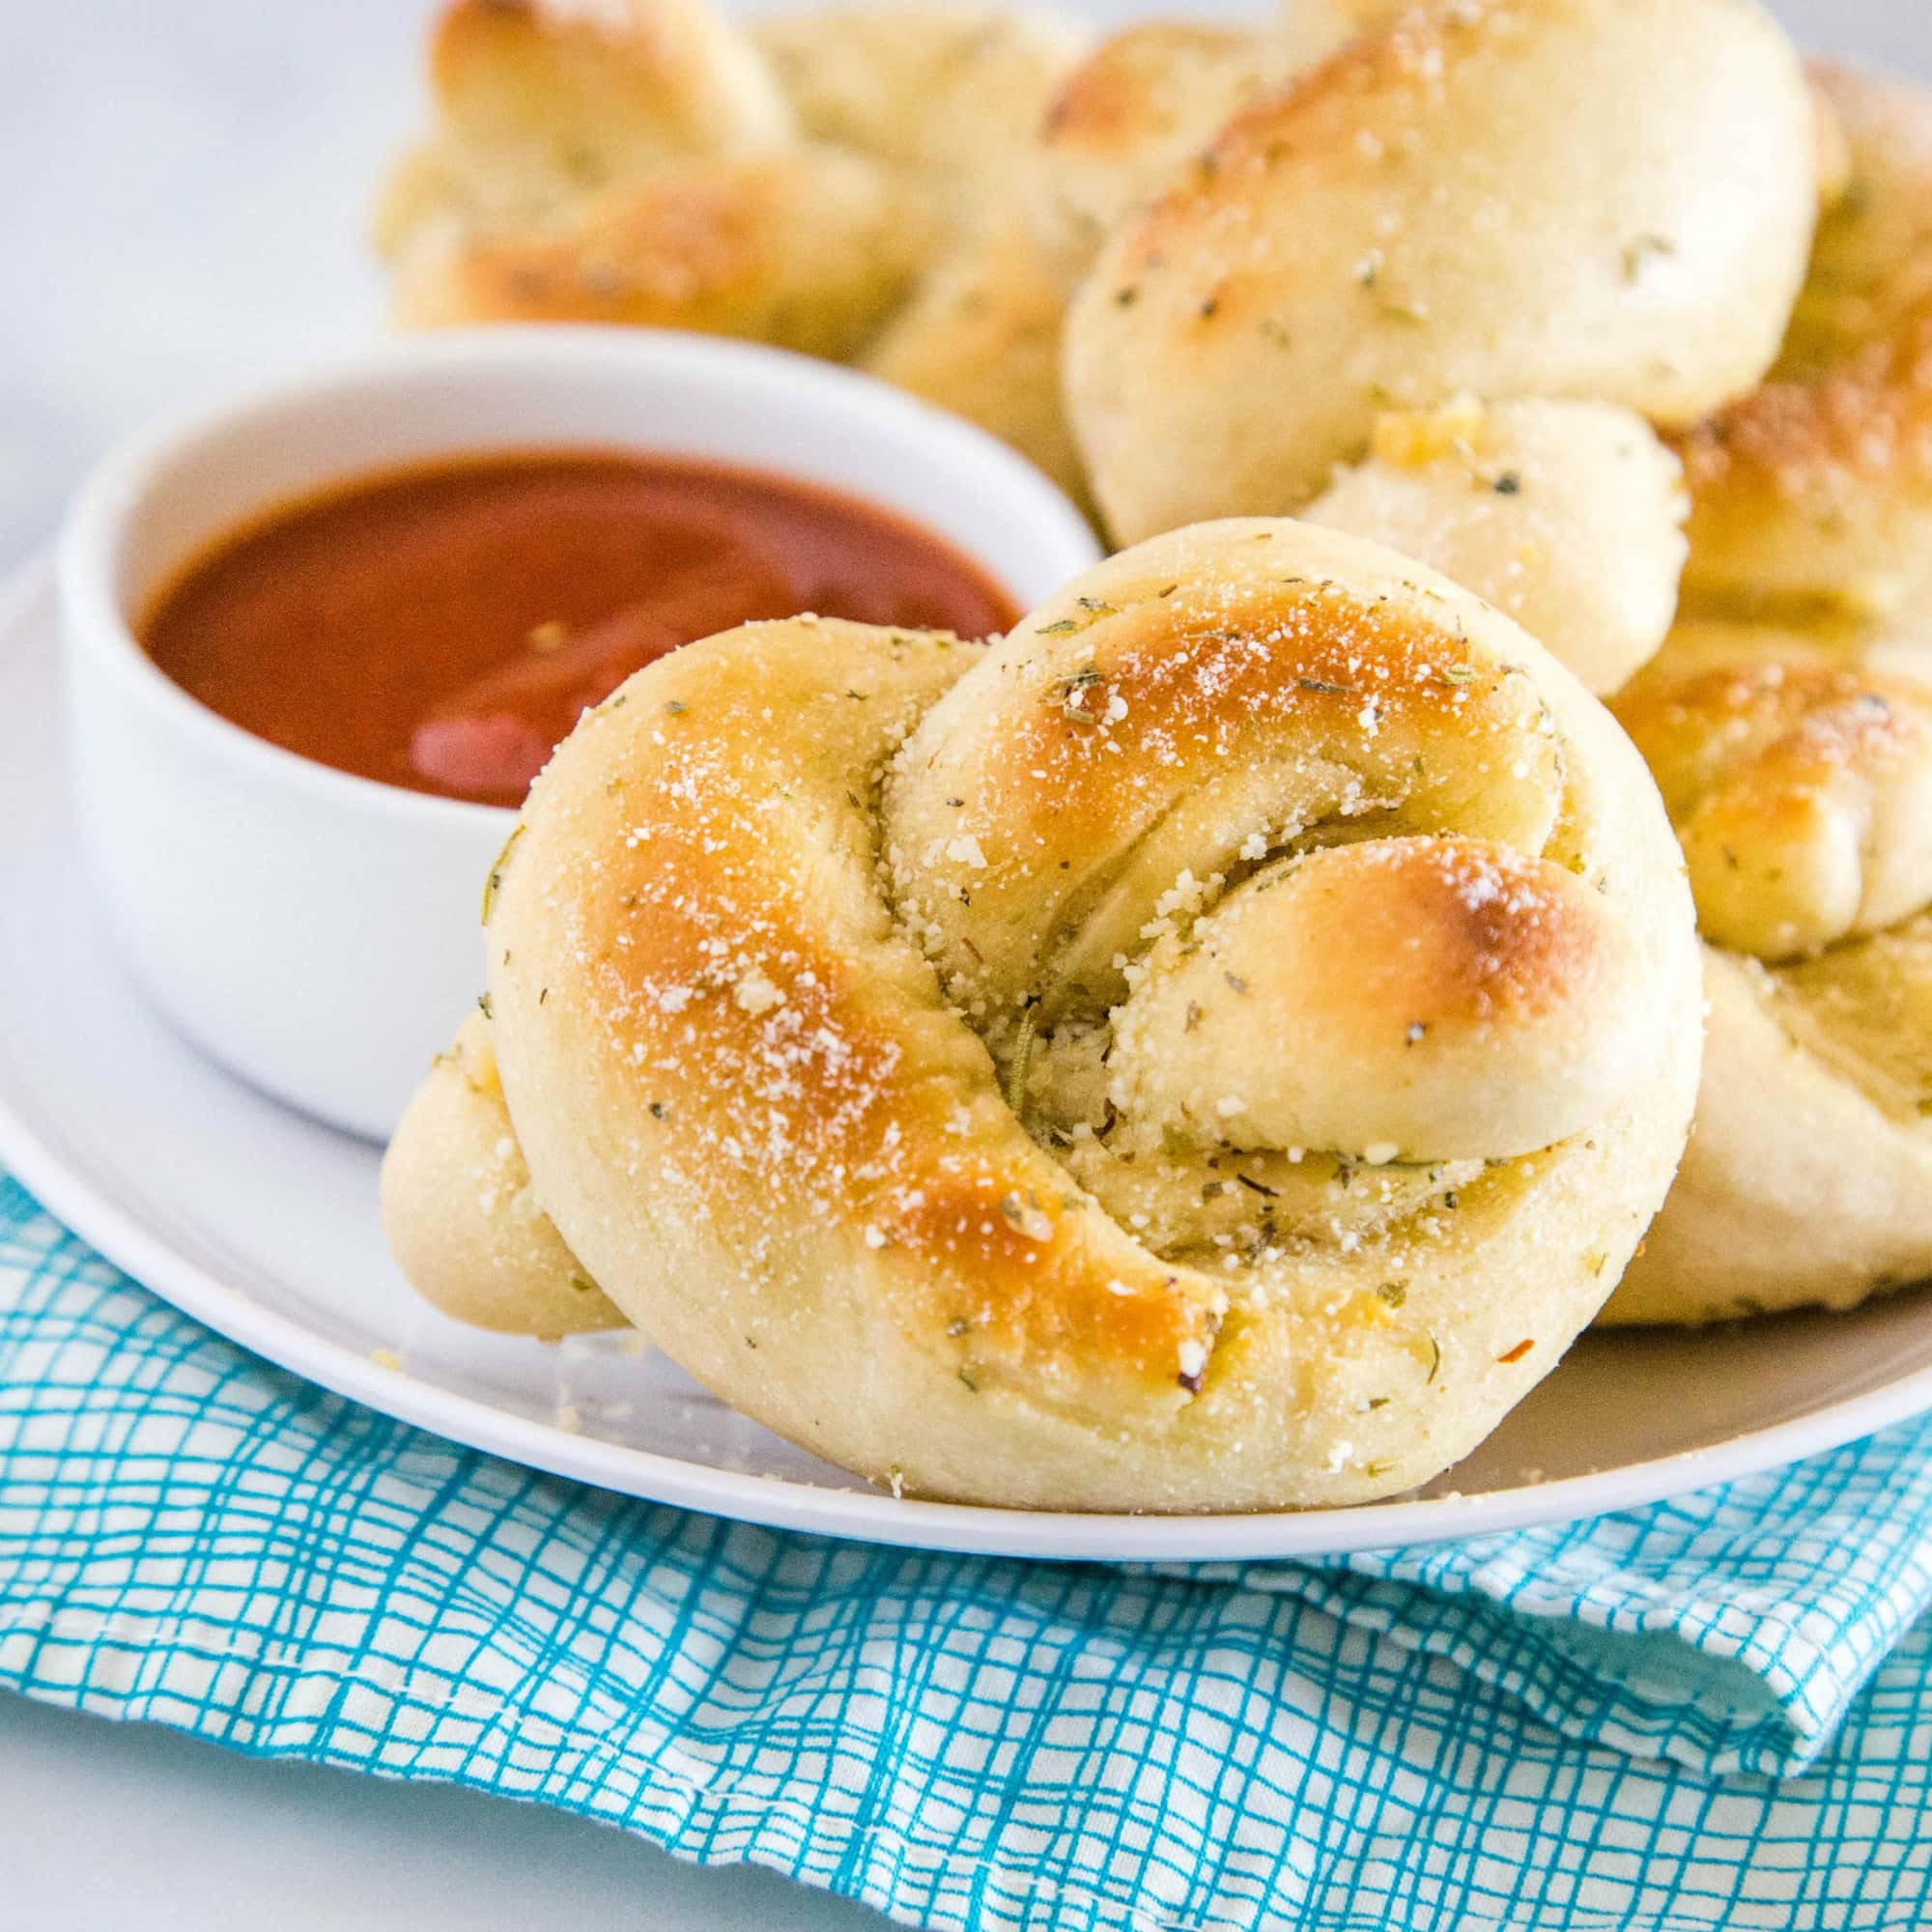 A plate of of garlic knots